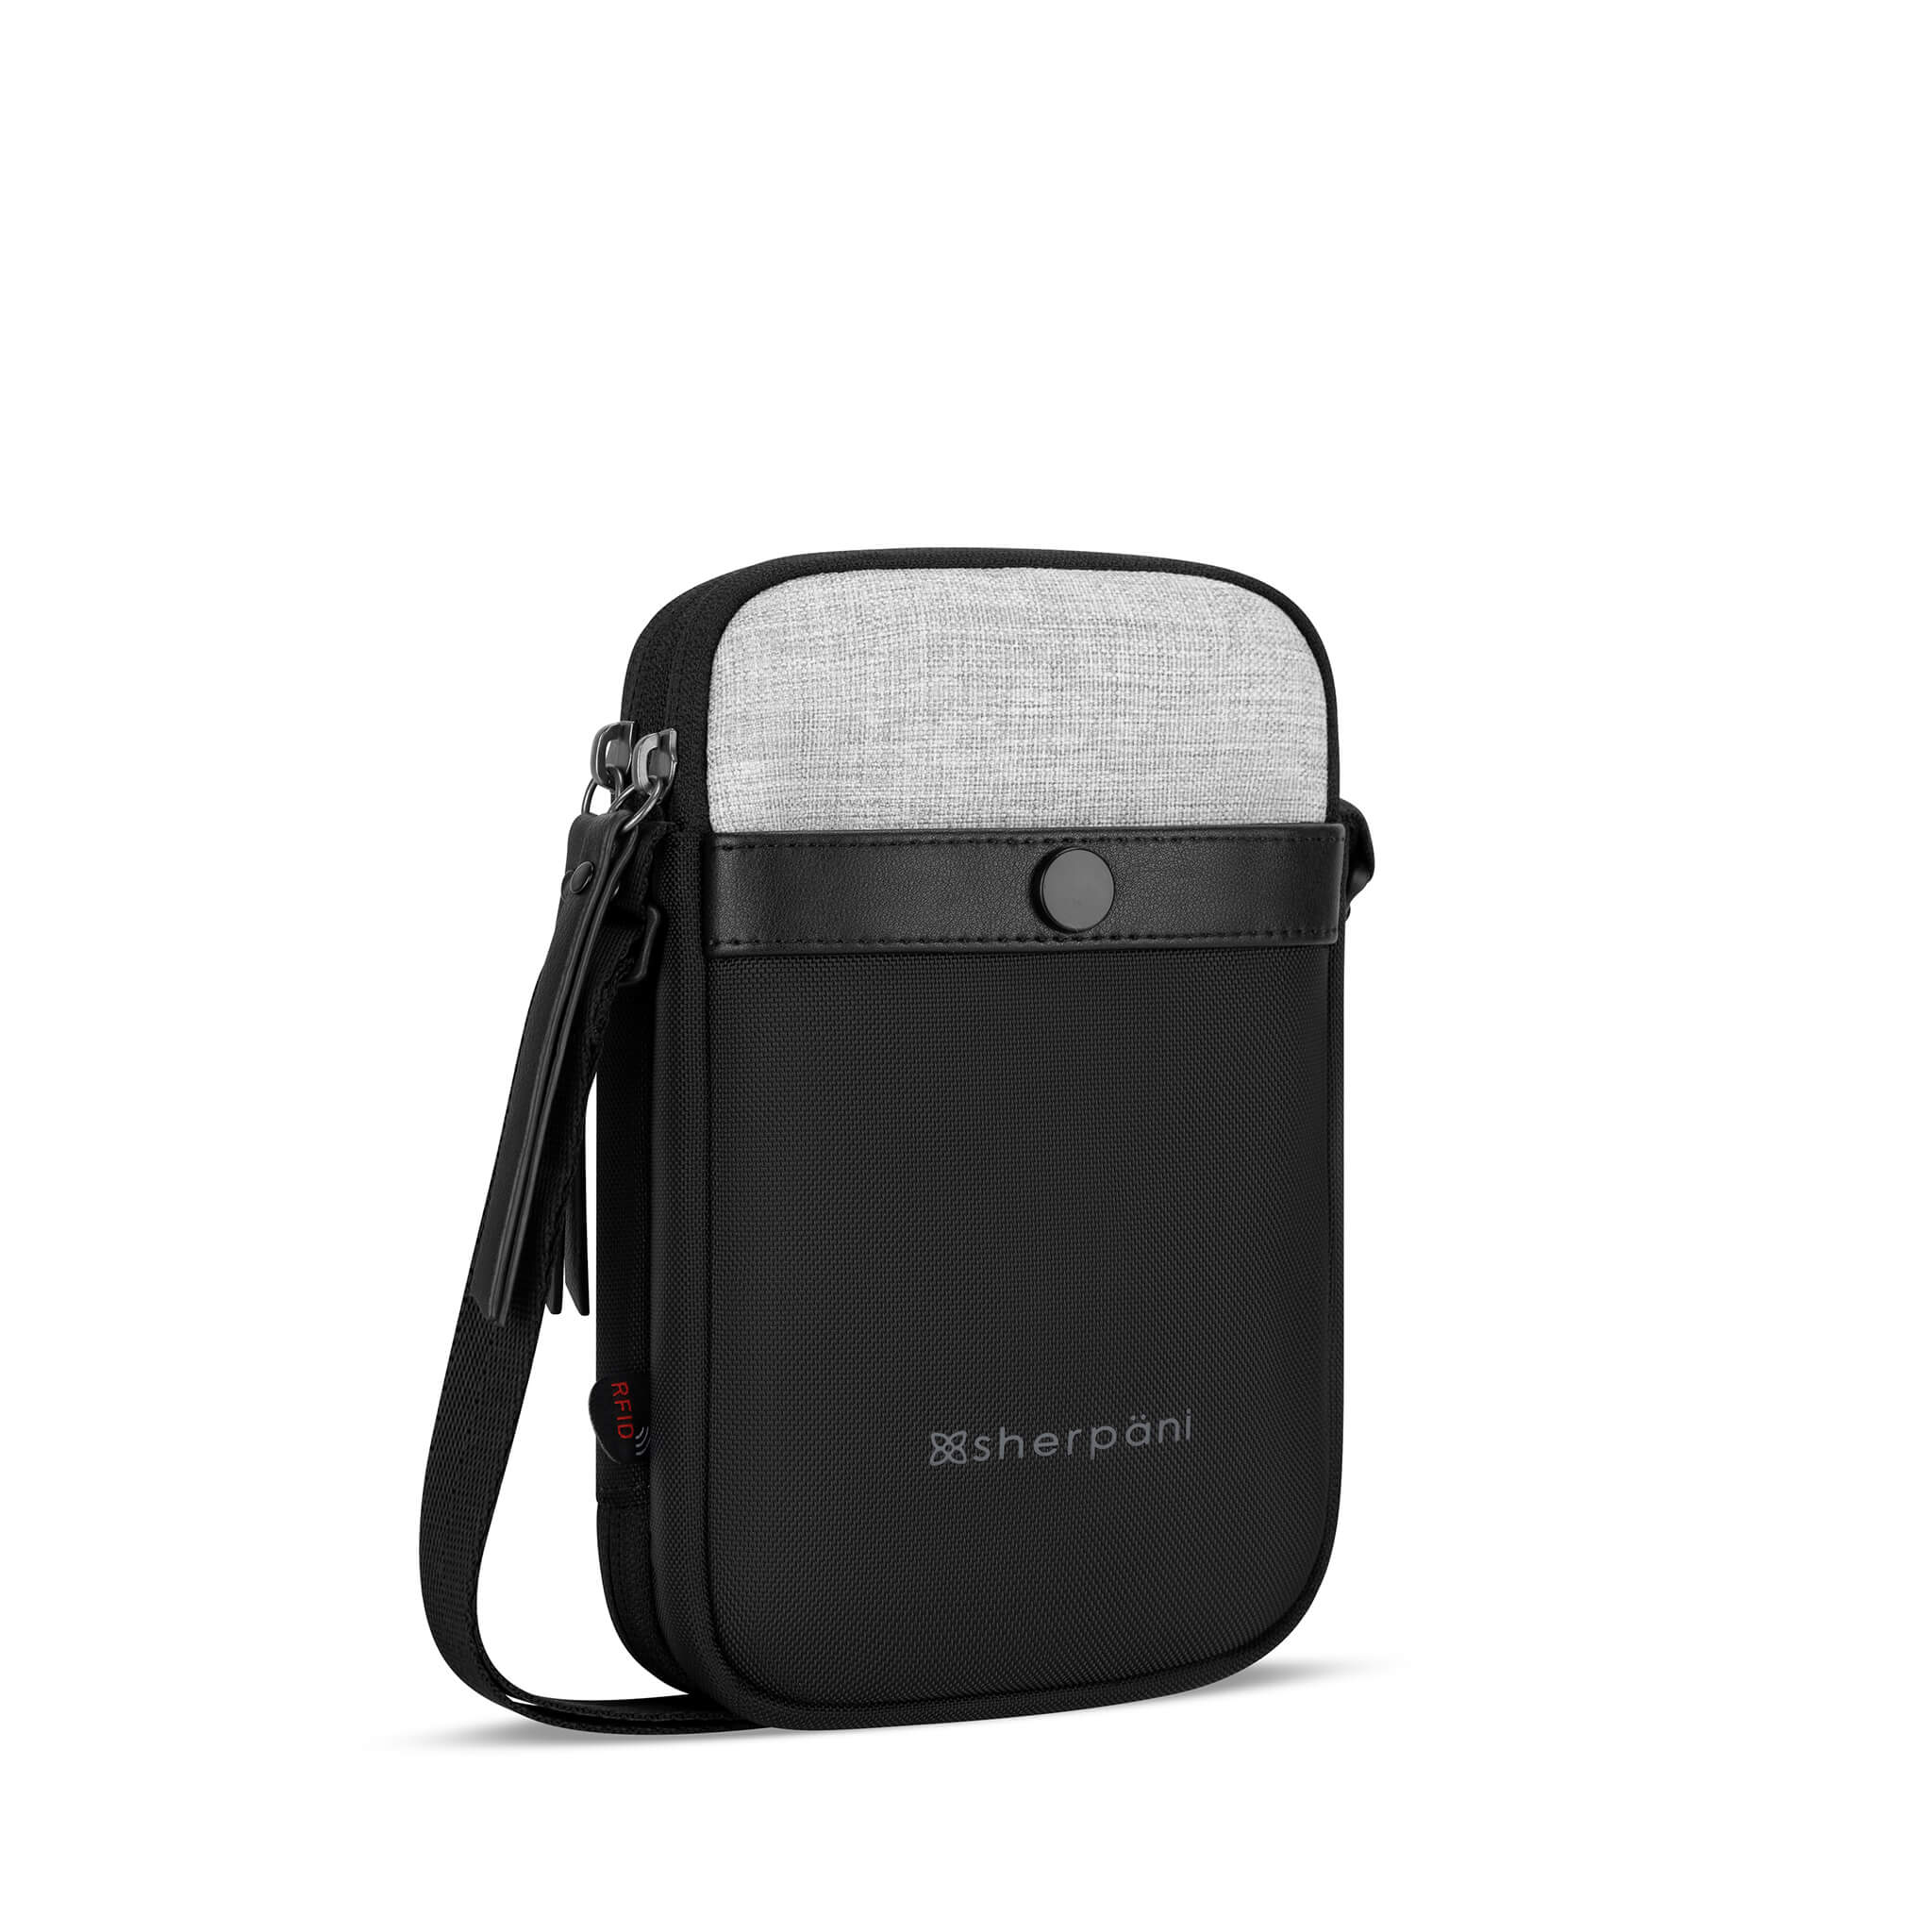 Angled front view of Sherpani crossbody wallet, the Simplicity in Sterling. The simple and minimalist bag includes anti-theft features and an adjustable crossbody strap. 